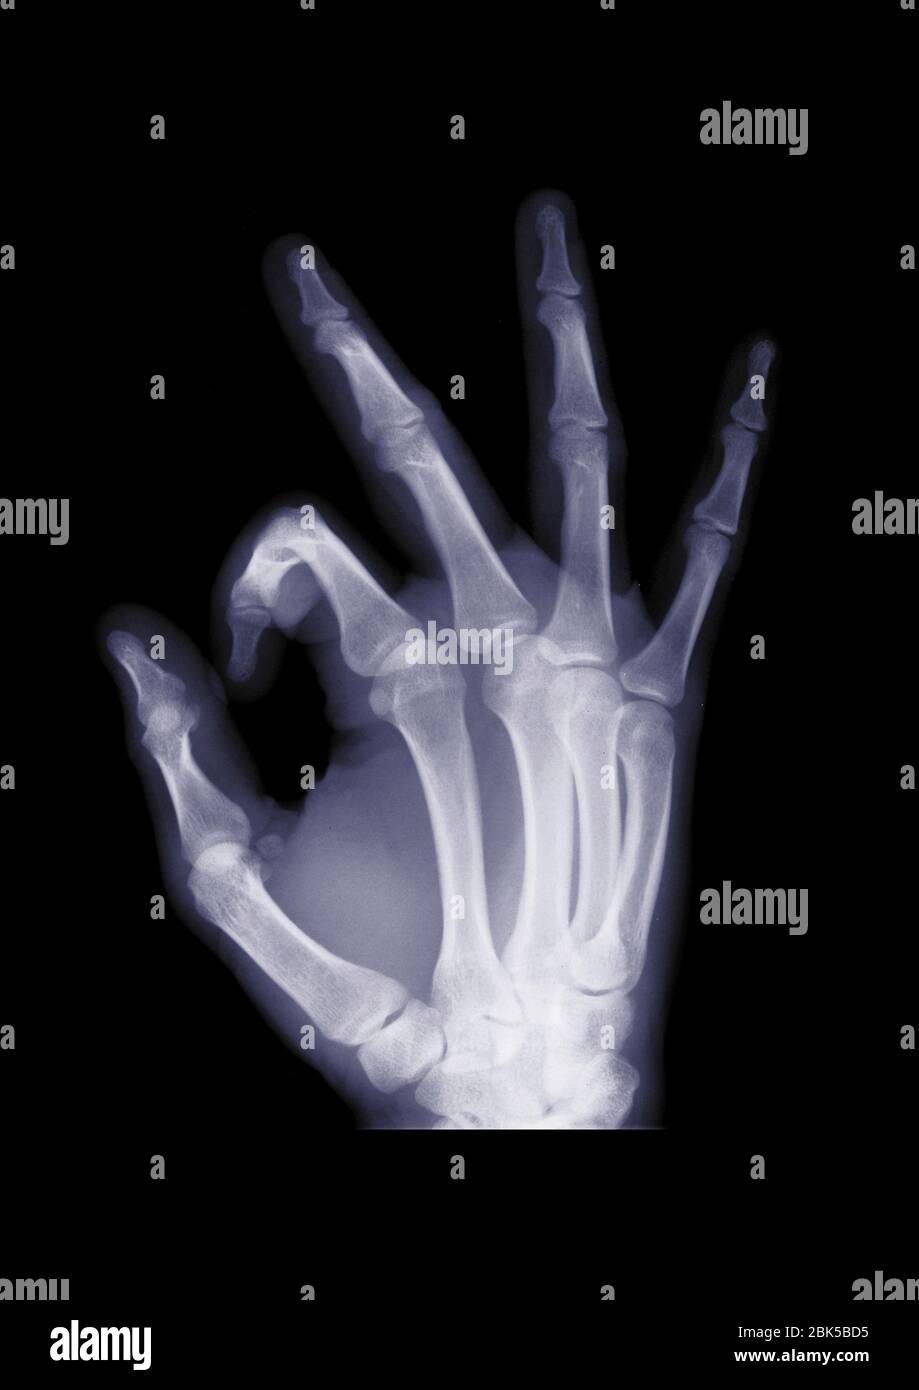 Hand making an OK gesture, X-ray. Stock Photo